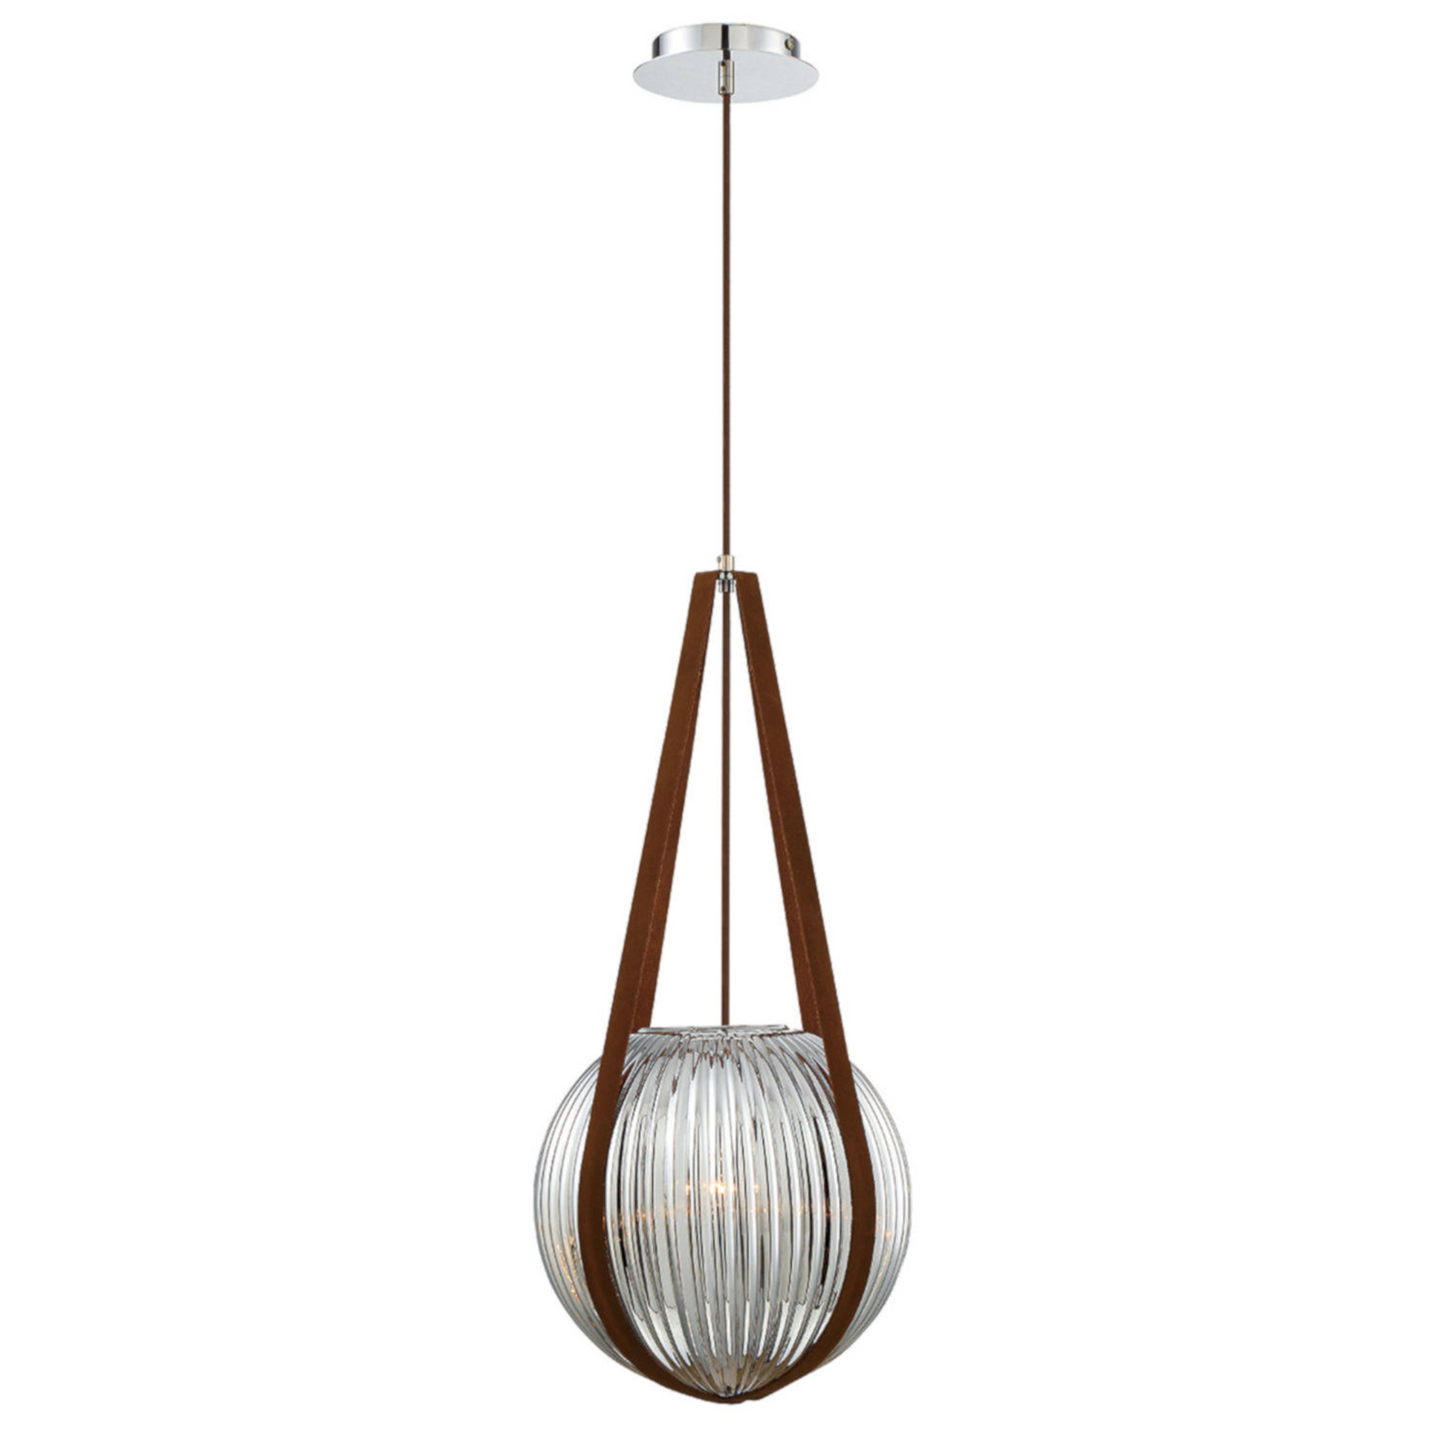 Load image into Gallery viewer, Modern New Glass Pendant Light by Gloss (0918/L)
